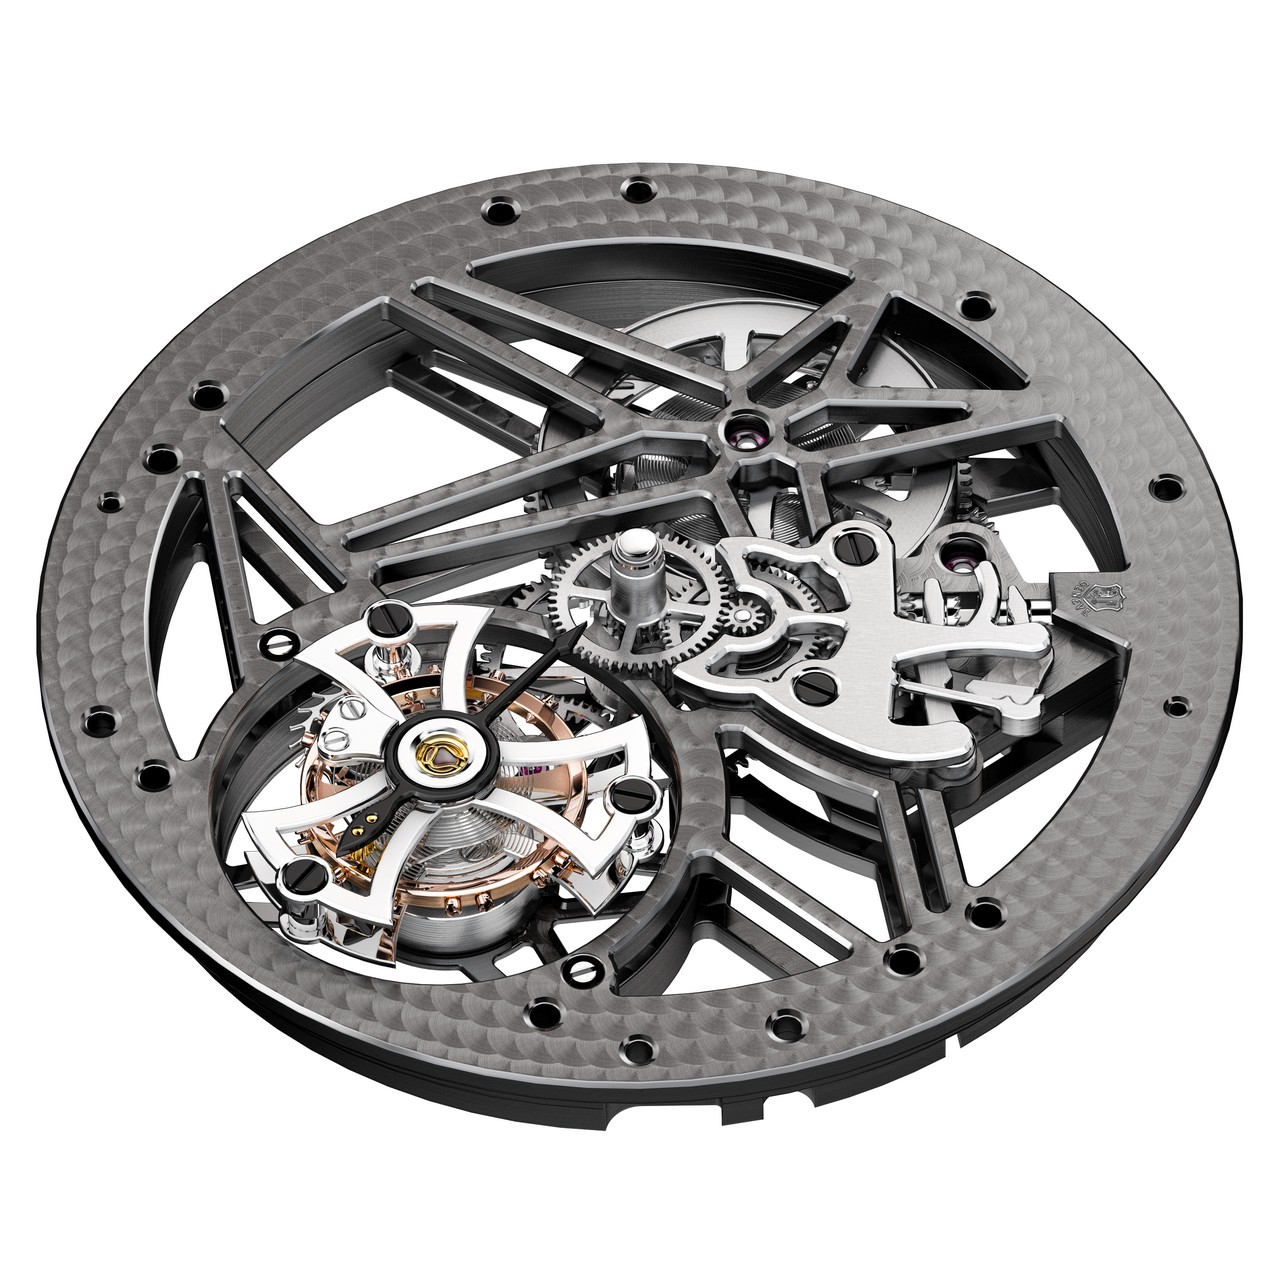 MANUFACTURE ROGER DUBUIS - Movement RD505SQ